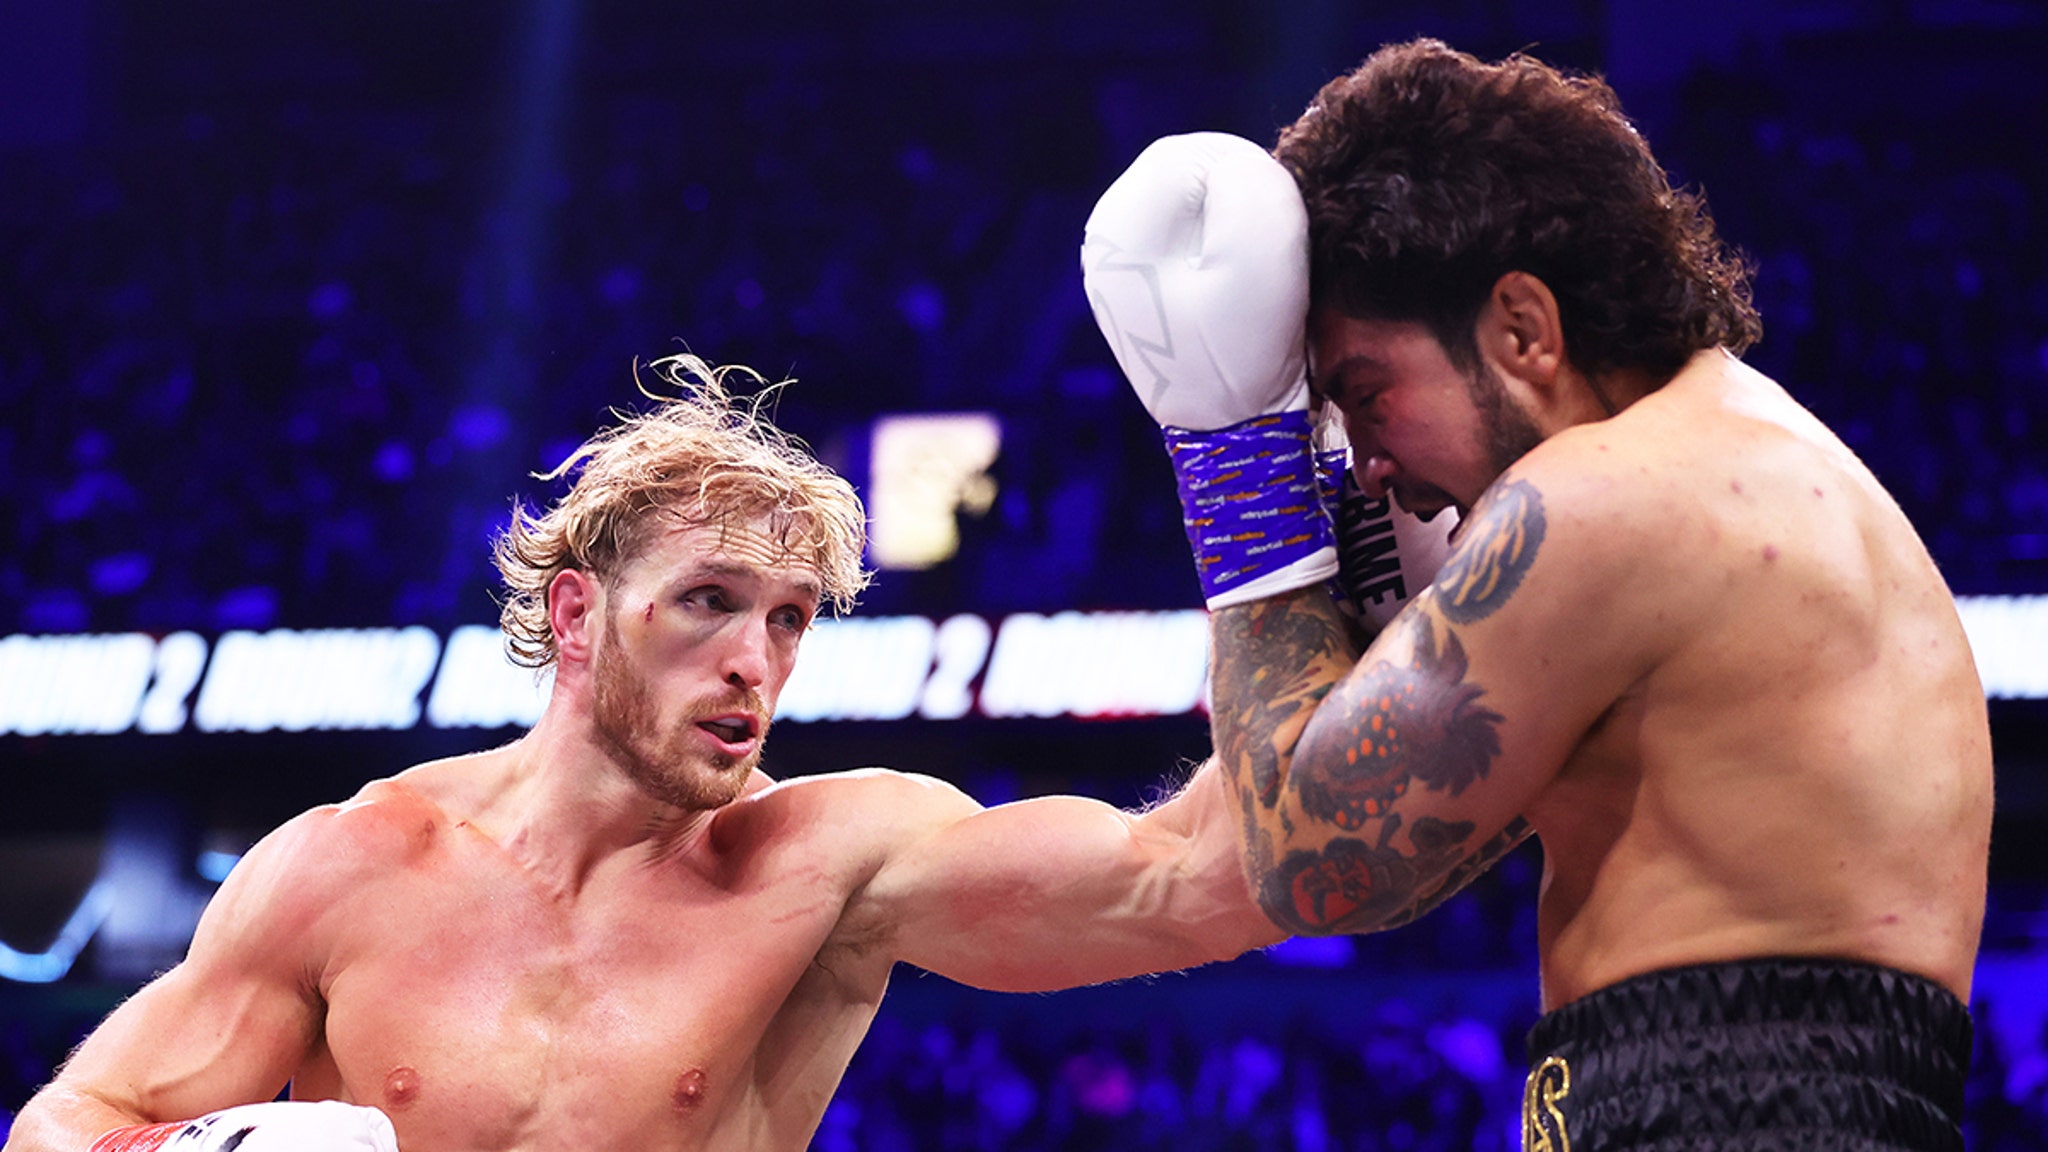 Logan Paul Beats Up Dillon Danis, Wins Fight, Chaos Erupts In Ring